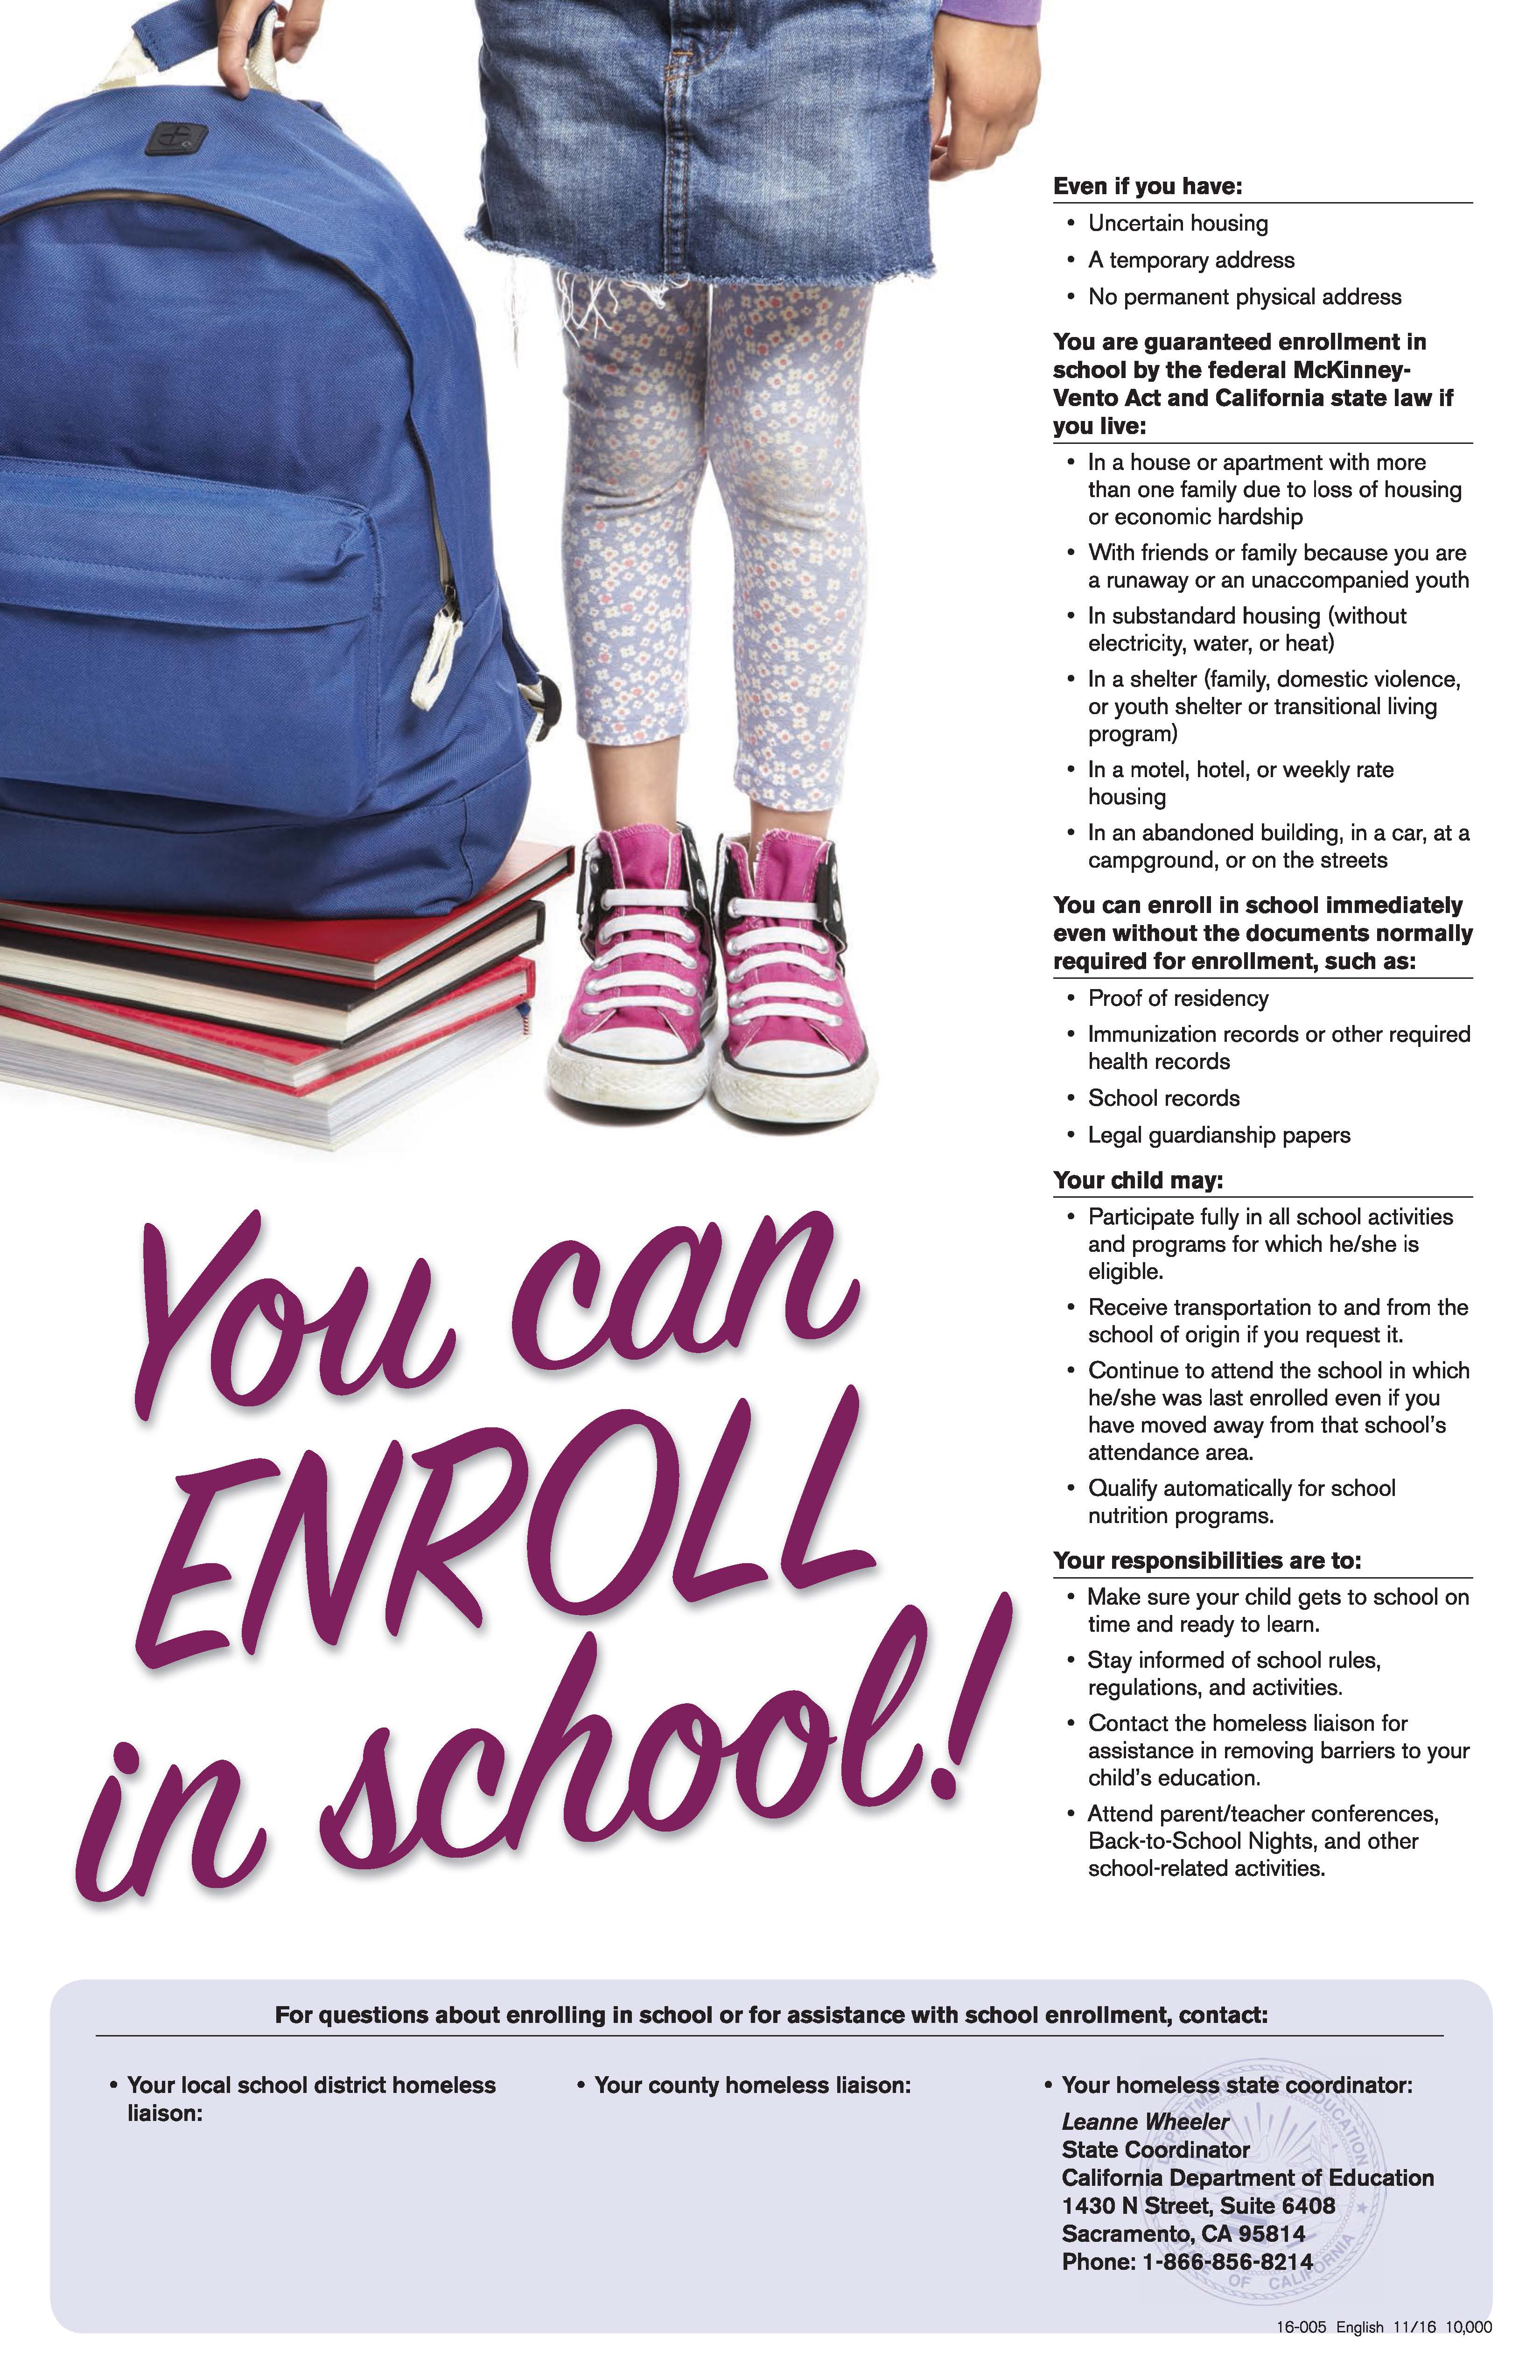 you can enroll in school poster with a child holding a backpack